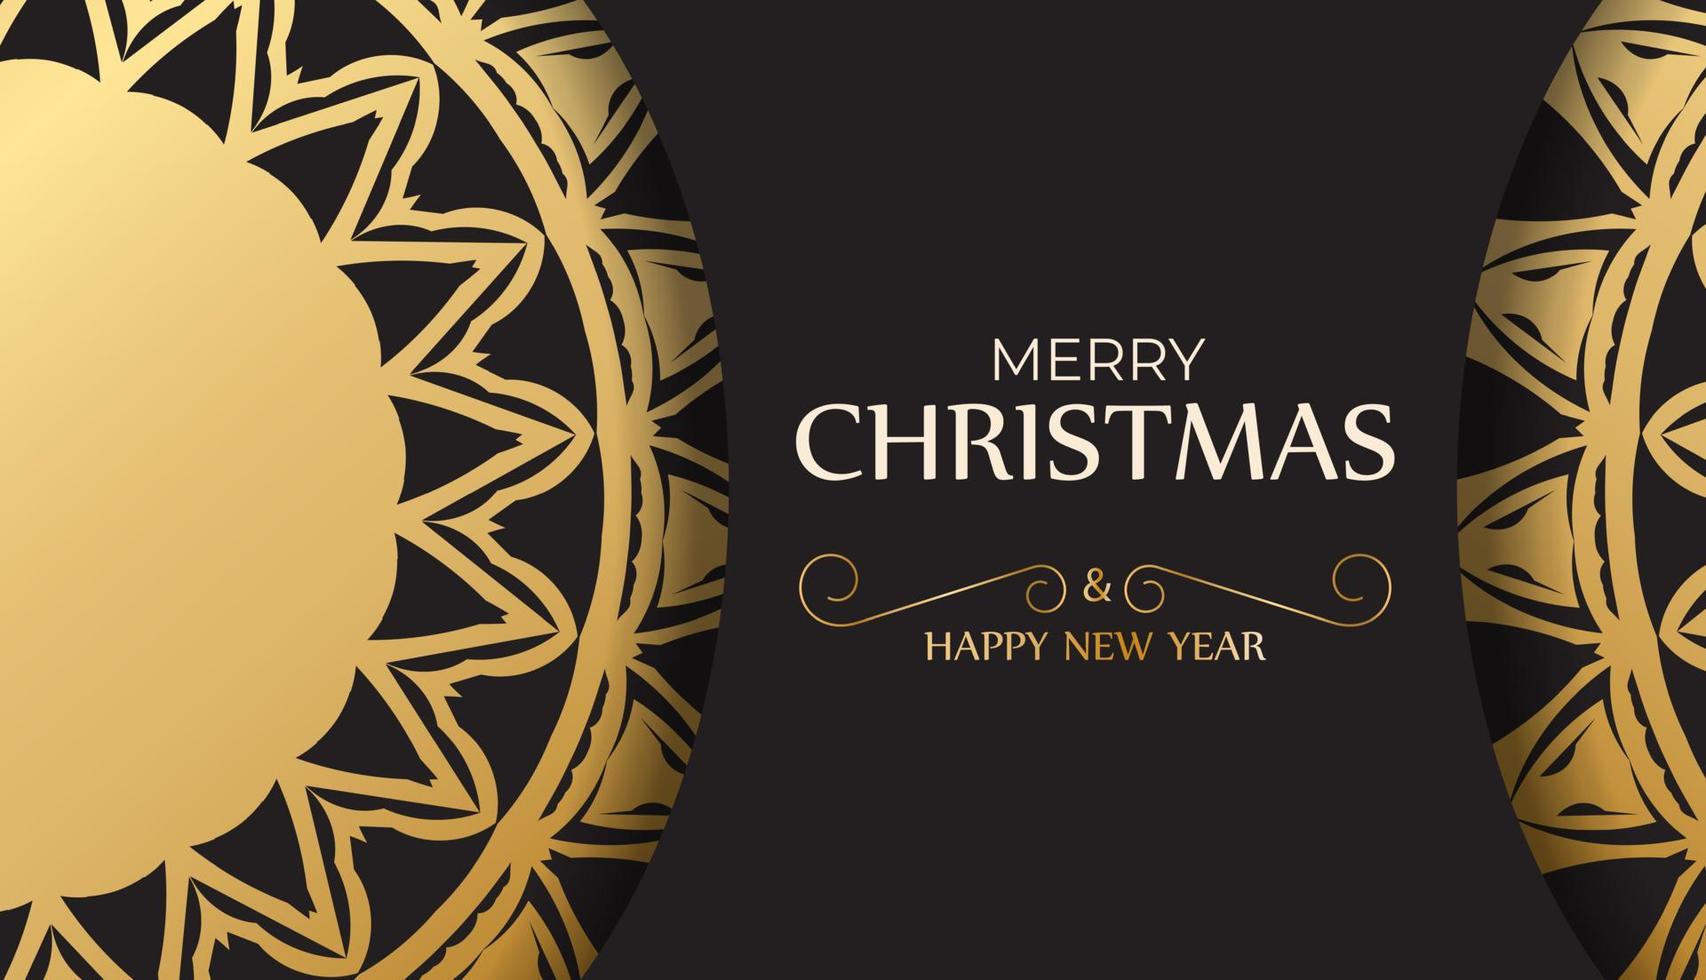 Flyer Merry Christmas and Happy New Year in black color with gold ornaments. vector